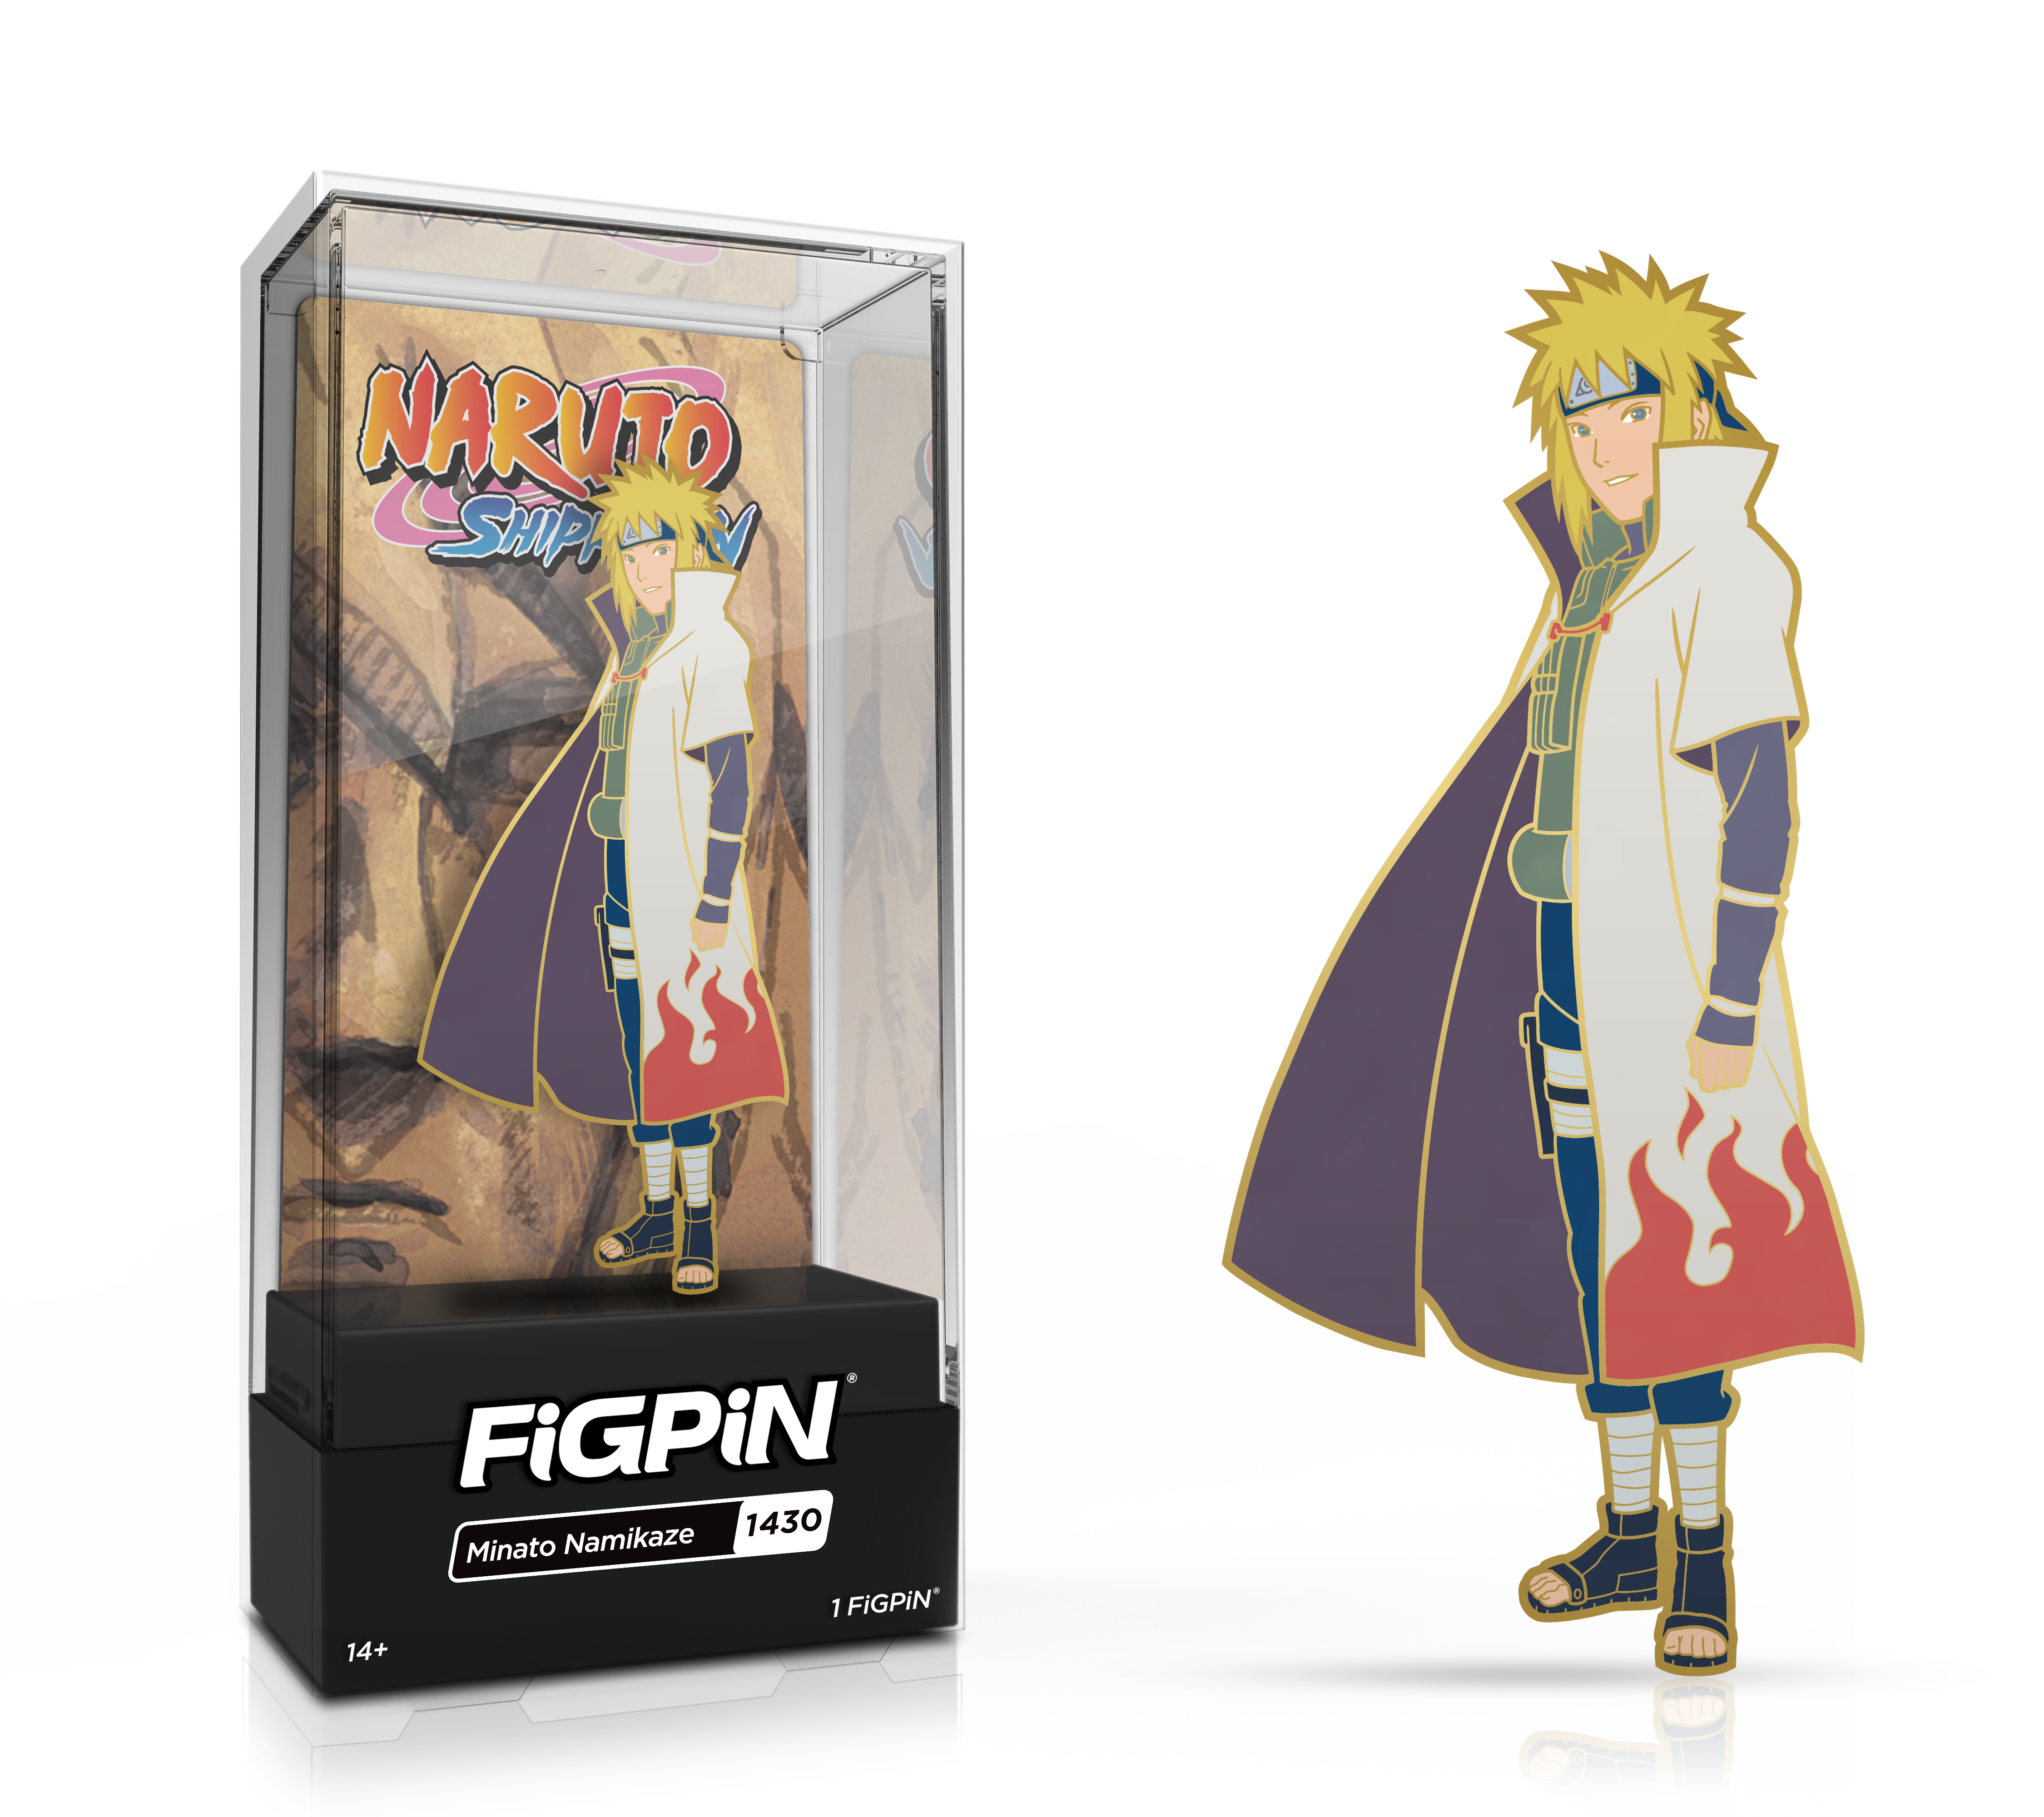 Side by side view of the Minato Namikaze enamel pin in display case and the art render.